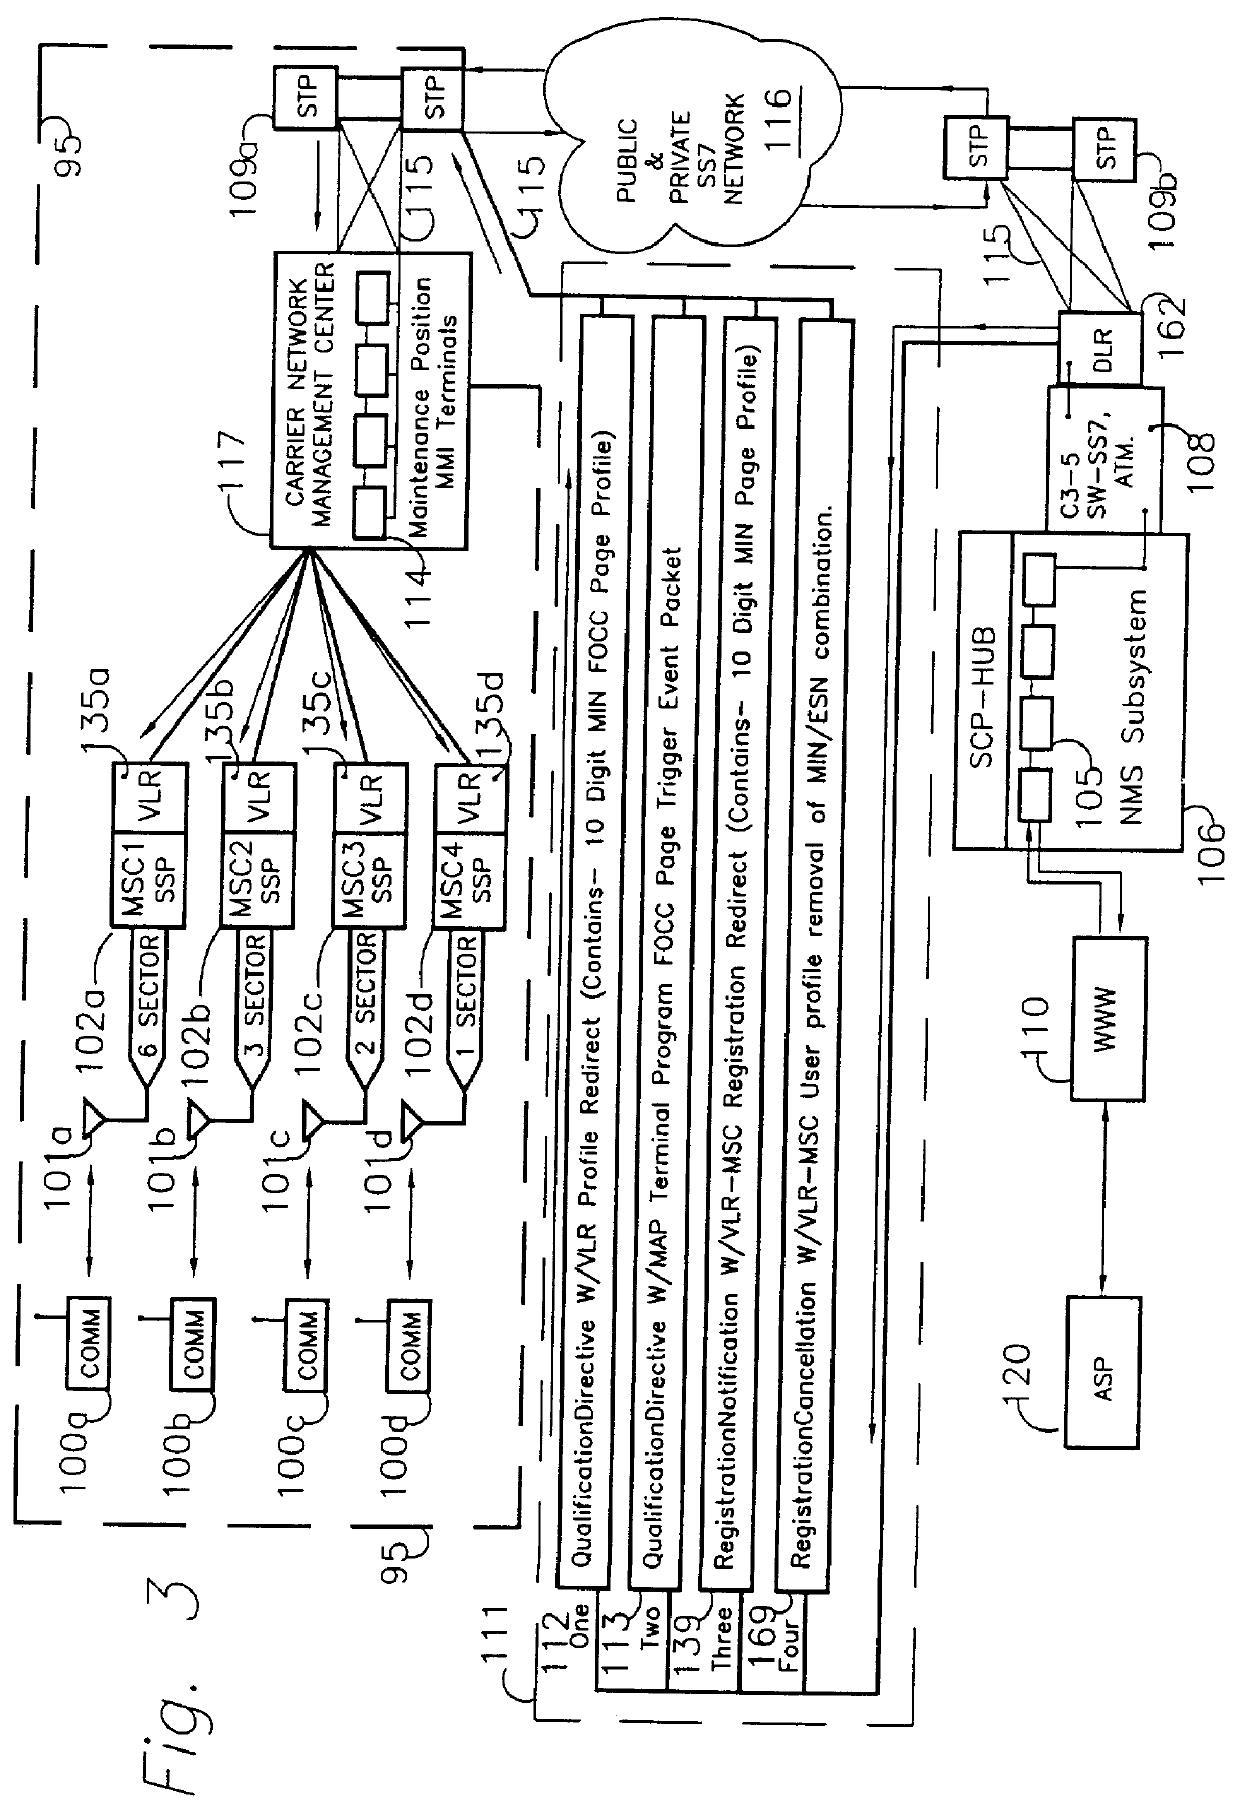 Method and apparatus for remote telephony switch control